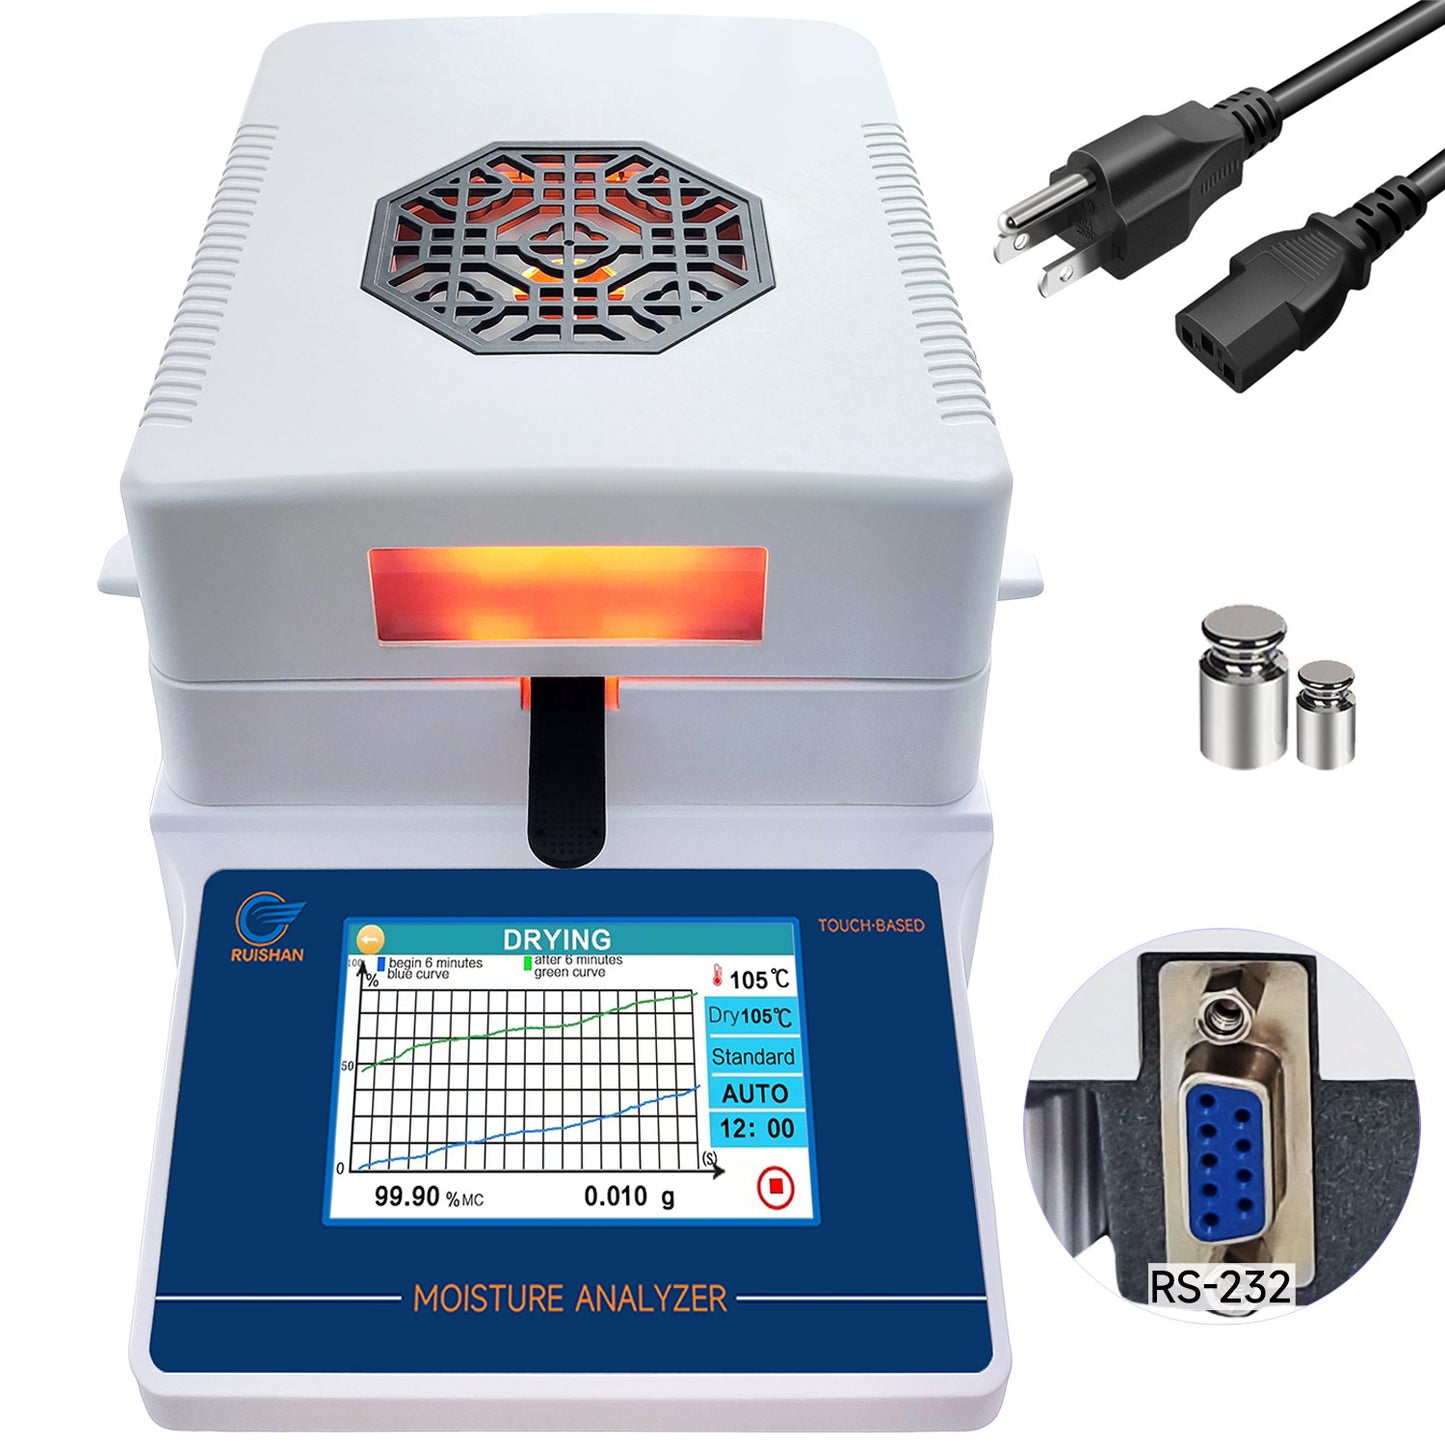 RUISHAN Halogen Heating Lab Moisture Analyzer Touch Screen with RS232 ports | PT series